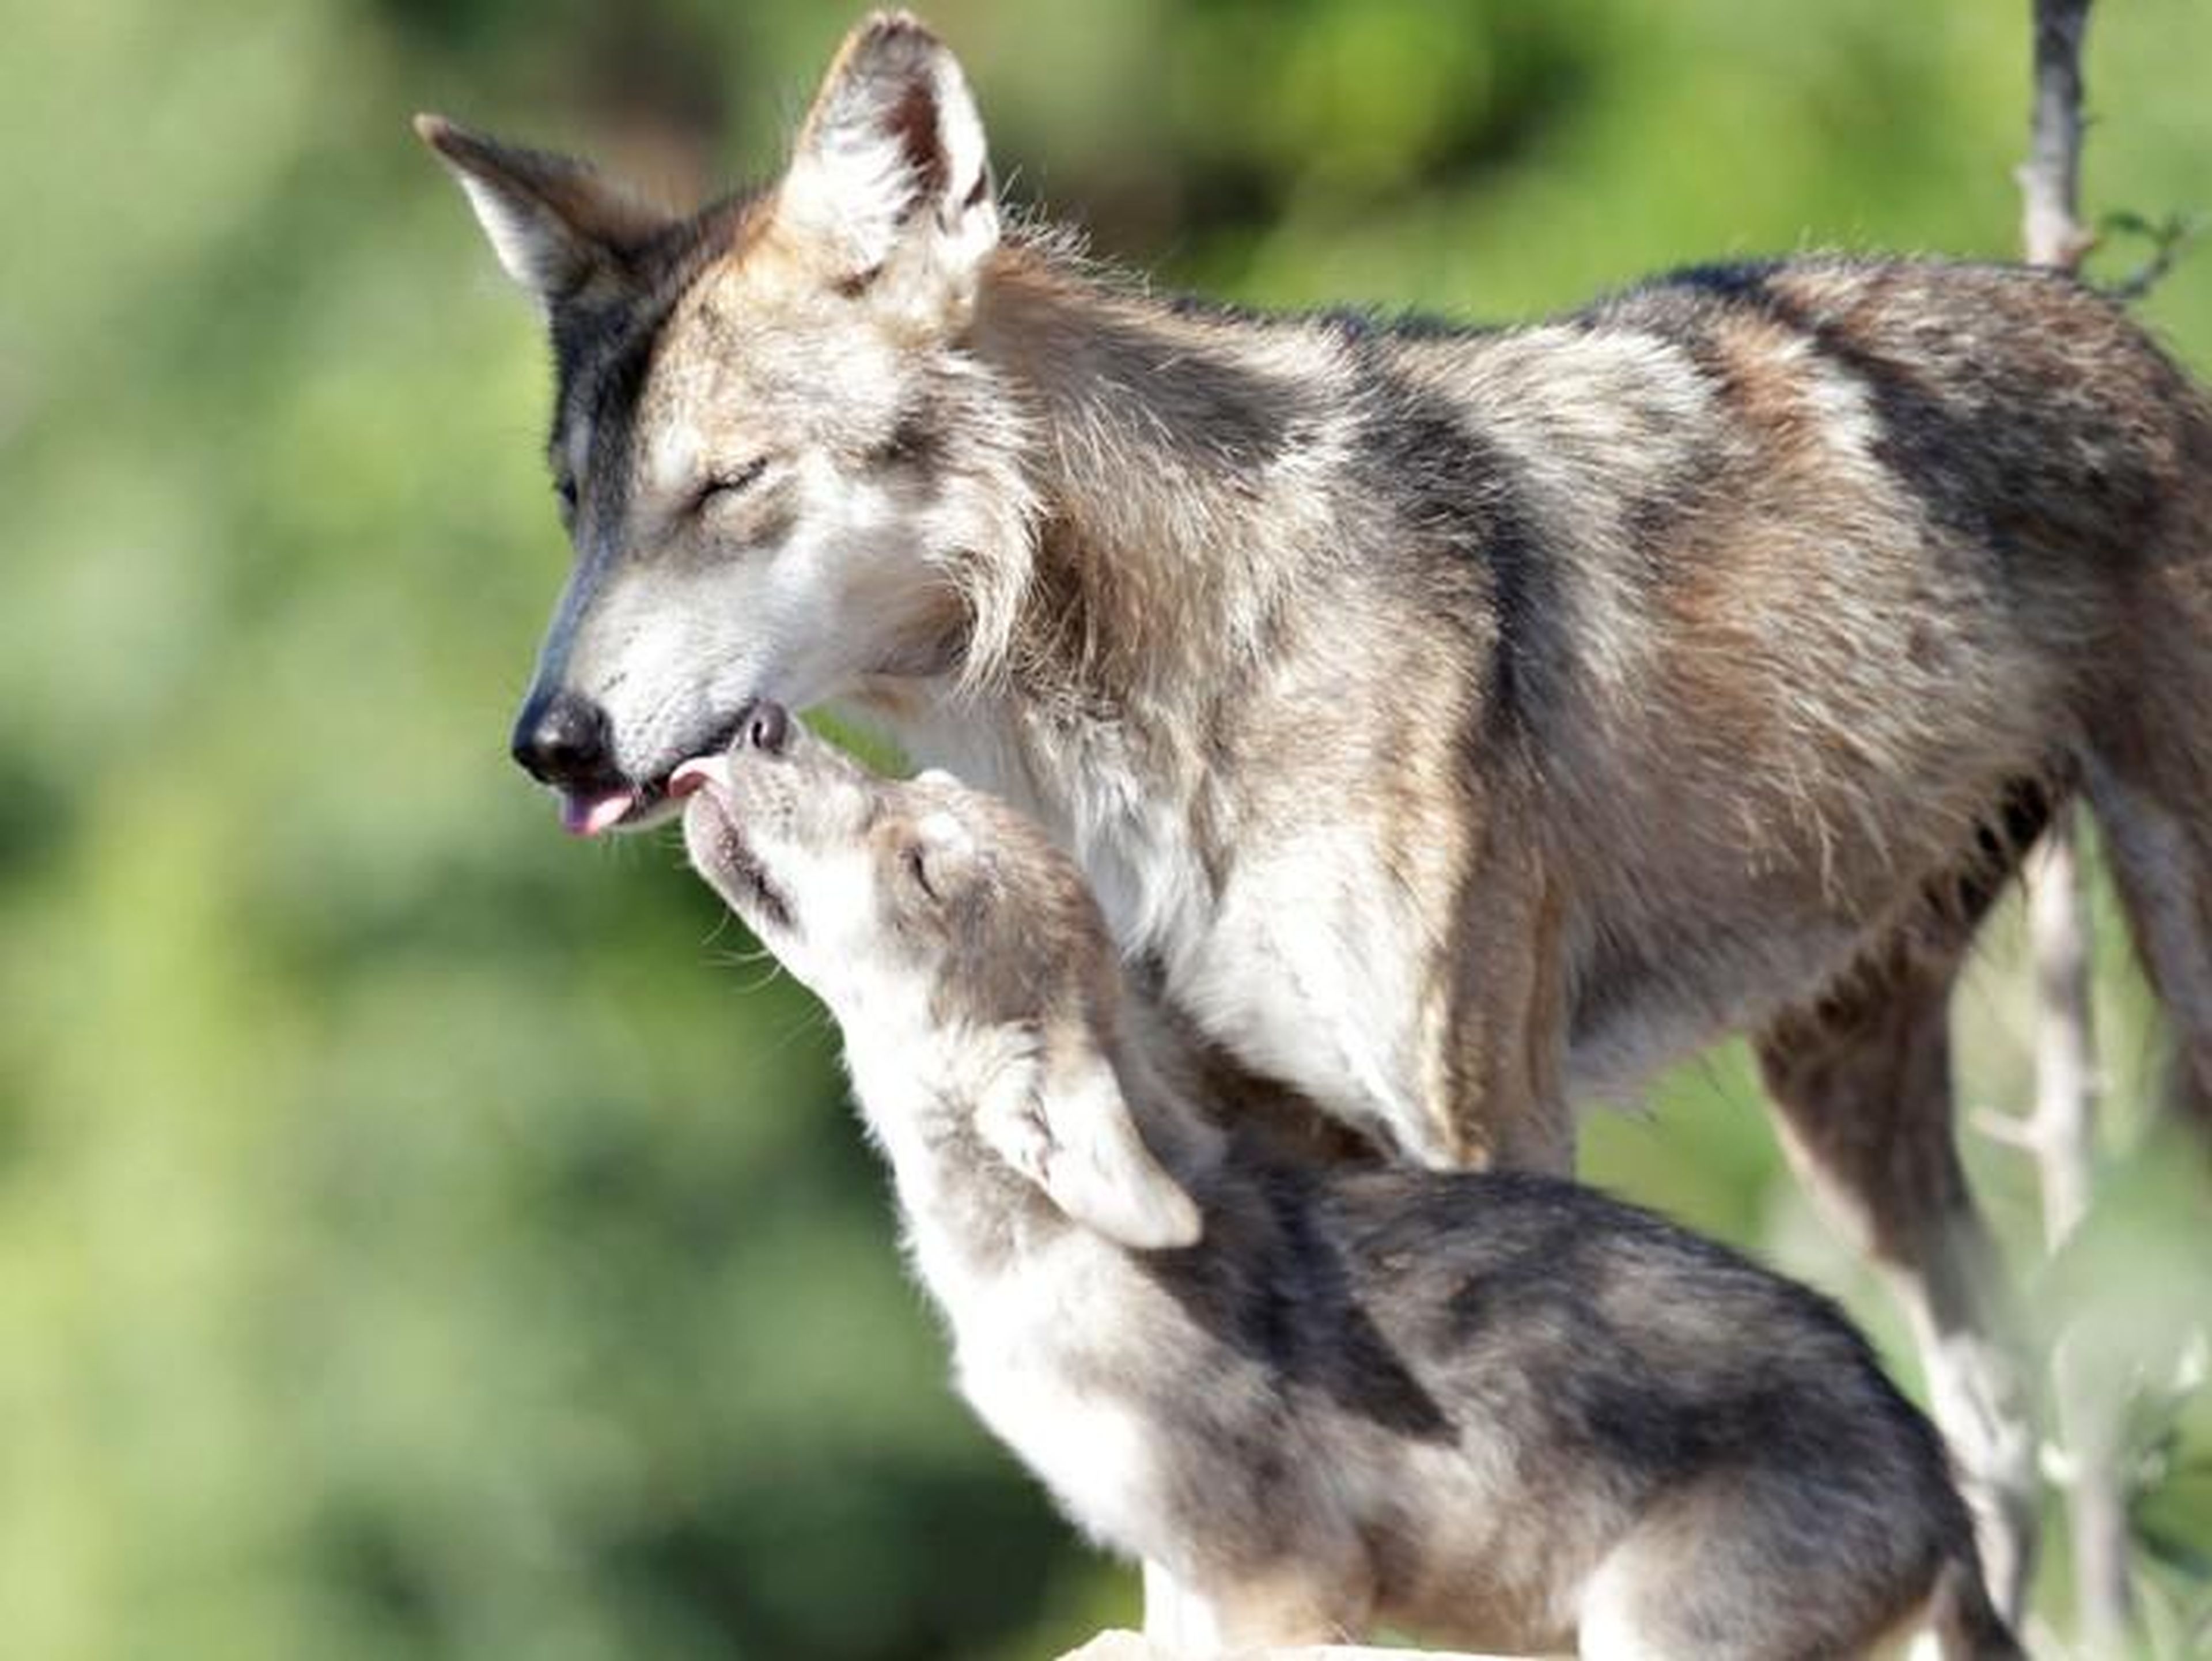 About 110 endangered Mexican gray wolves remain in the wild today.